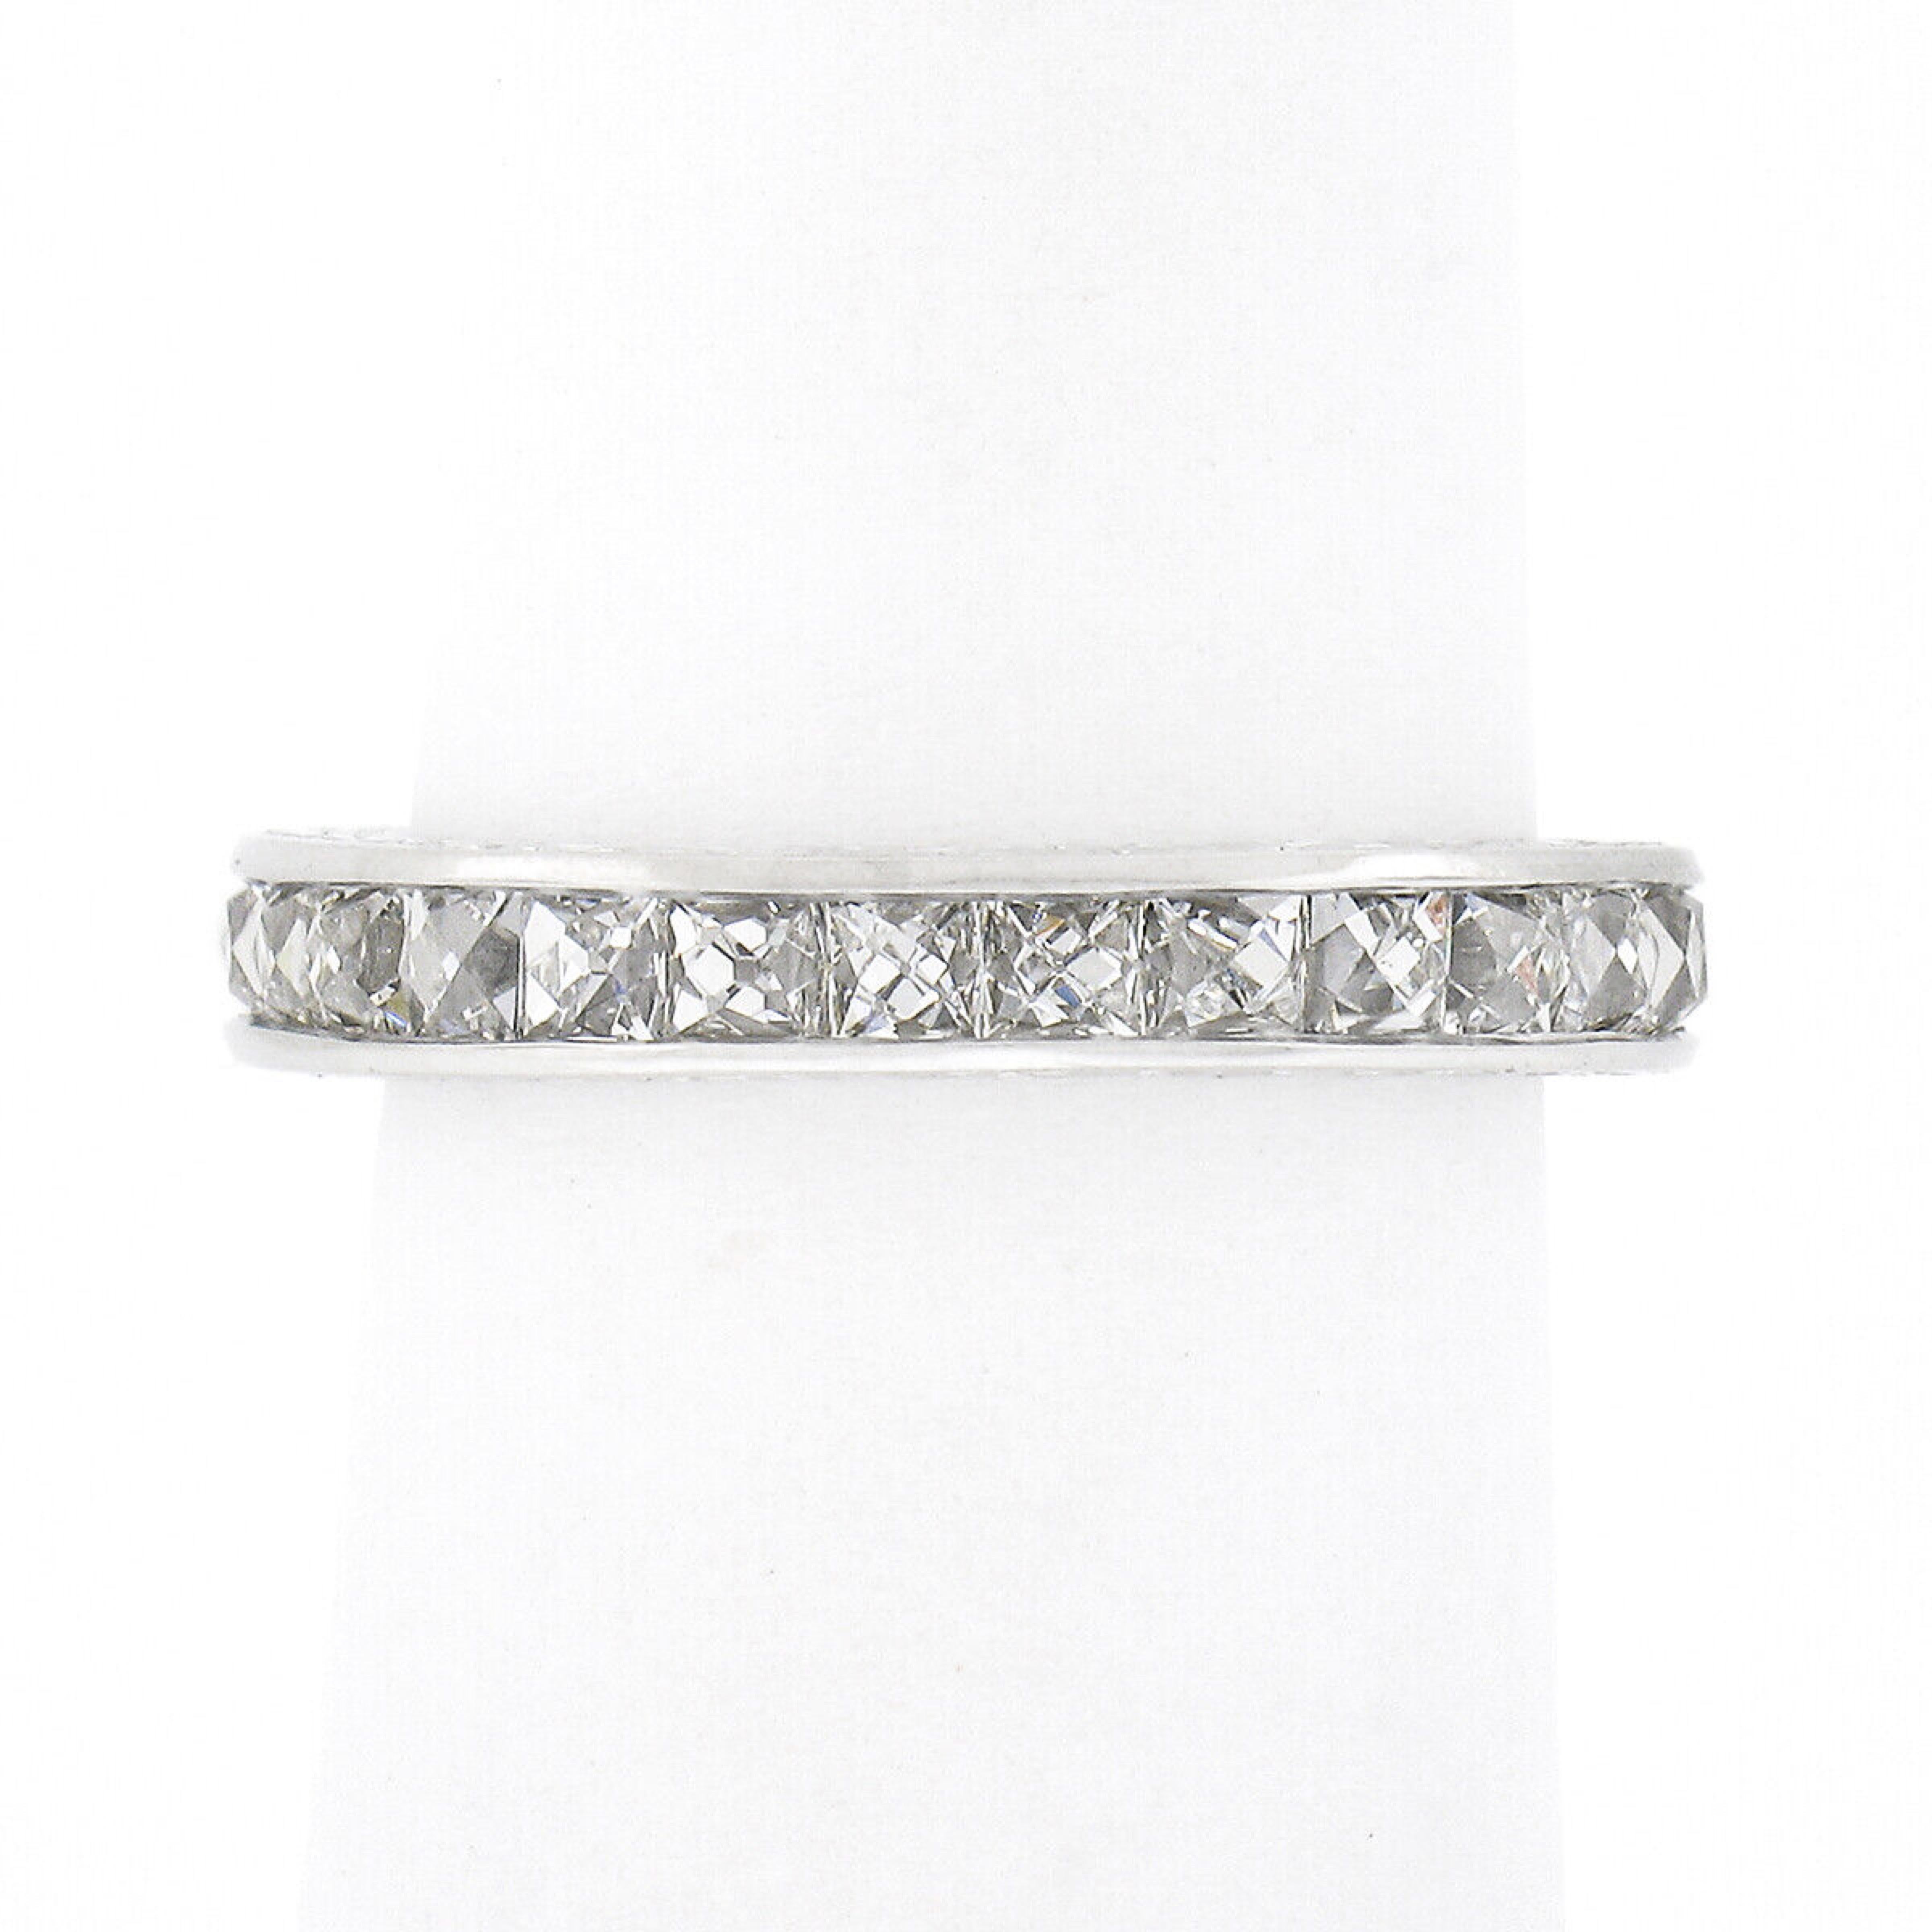 This gorgeous vintage diamond eternity band ring was crafted from solid platinum and features 27, top quality, square French cut diamonds neatly channel set entirely throughout the band. These stunning and super lively diamonds total approximately 3